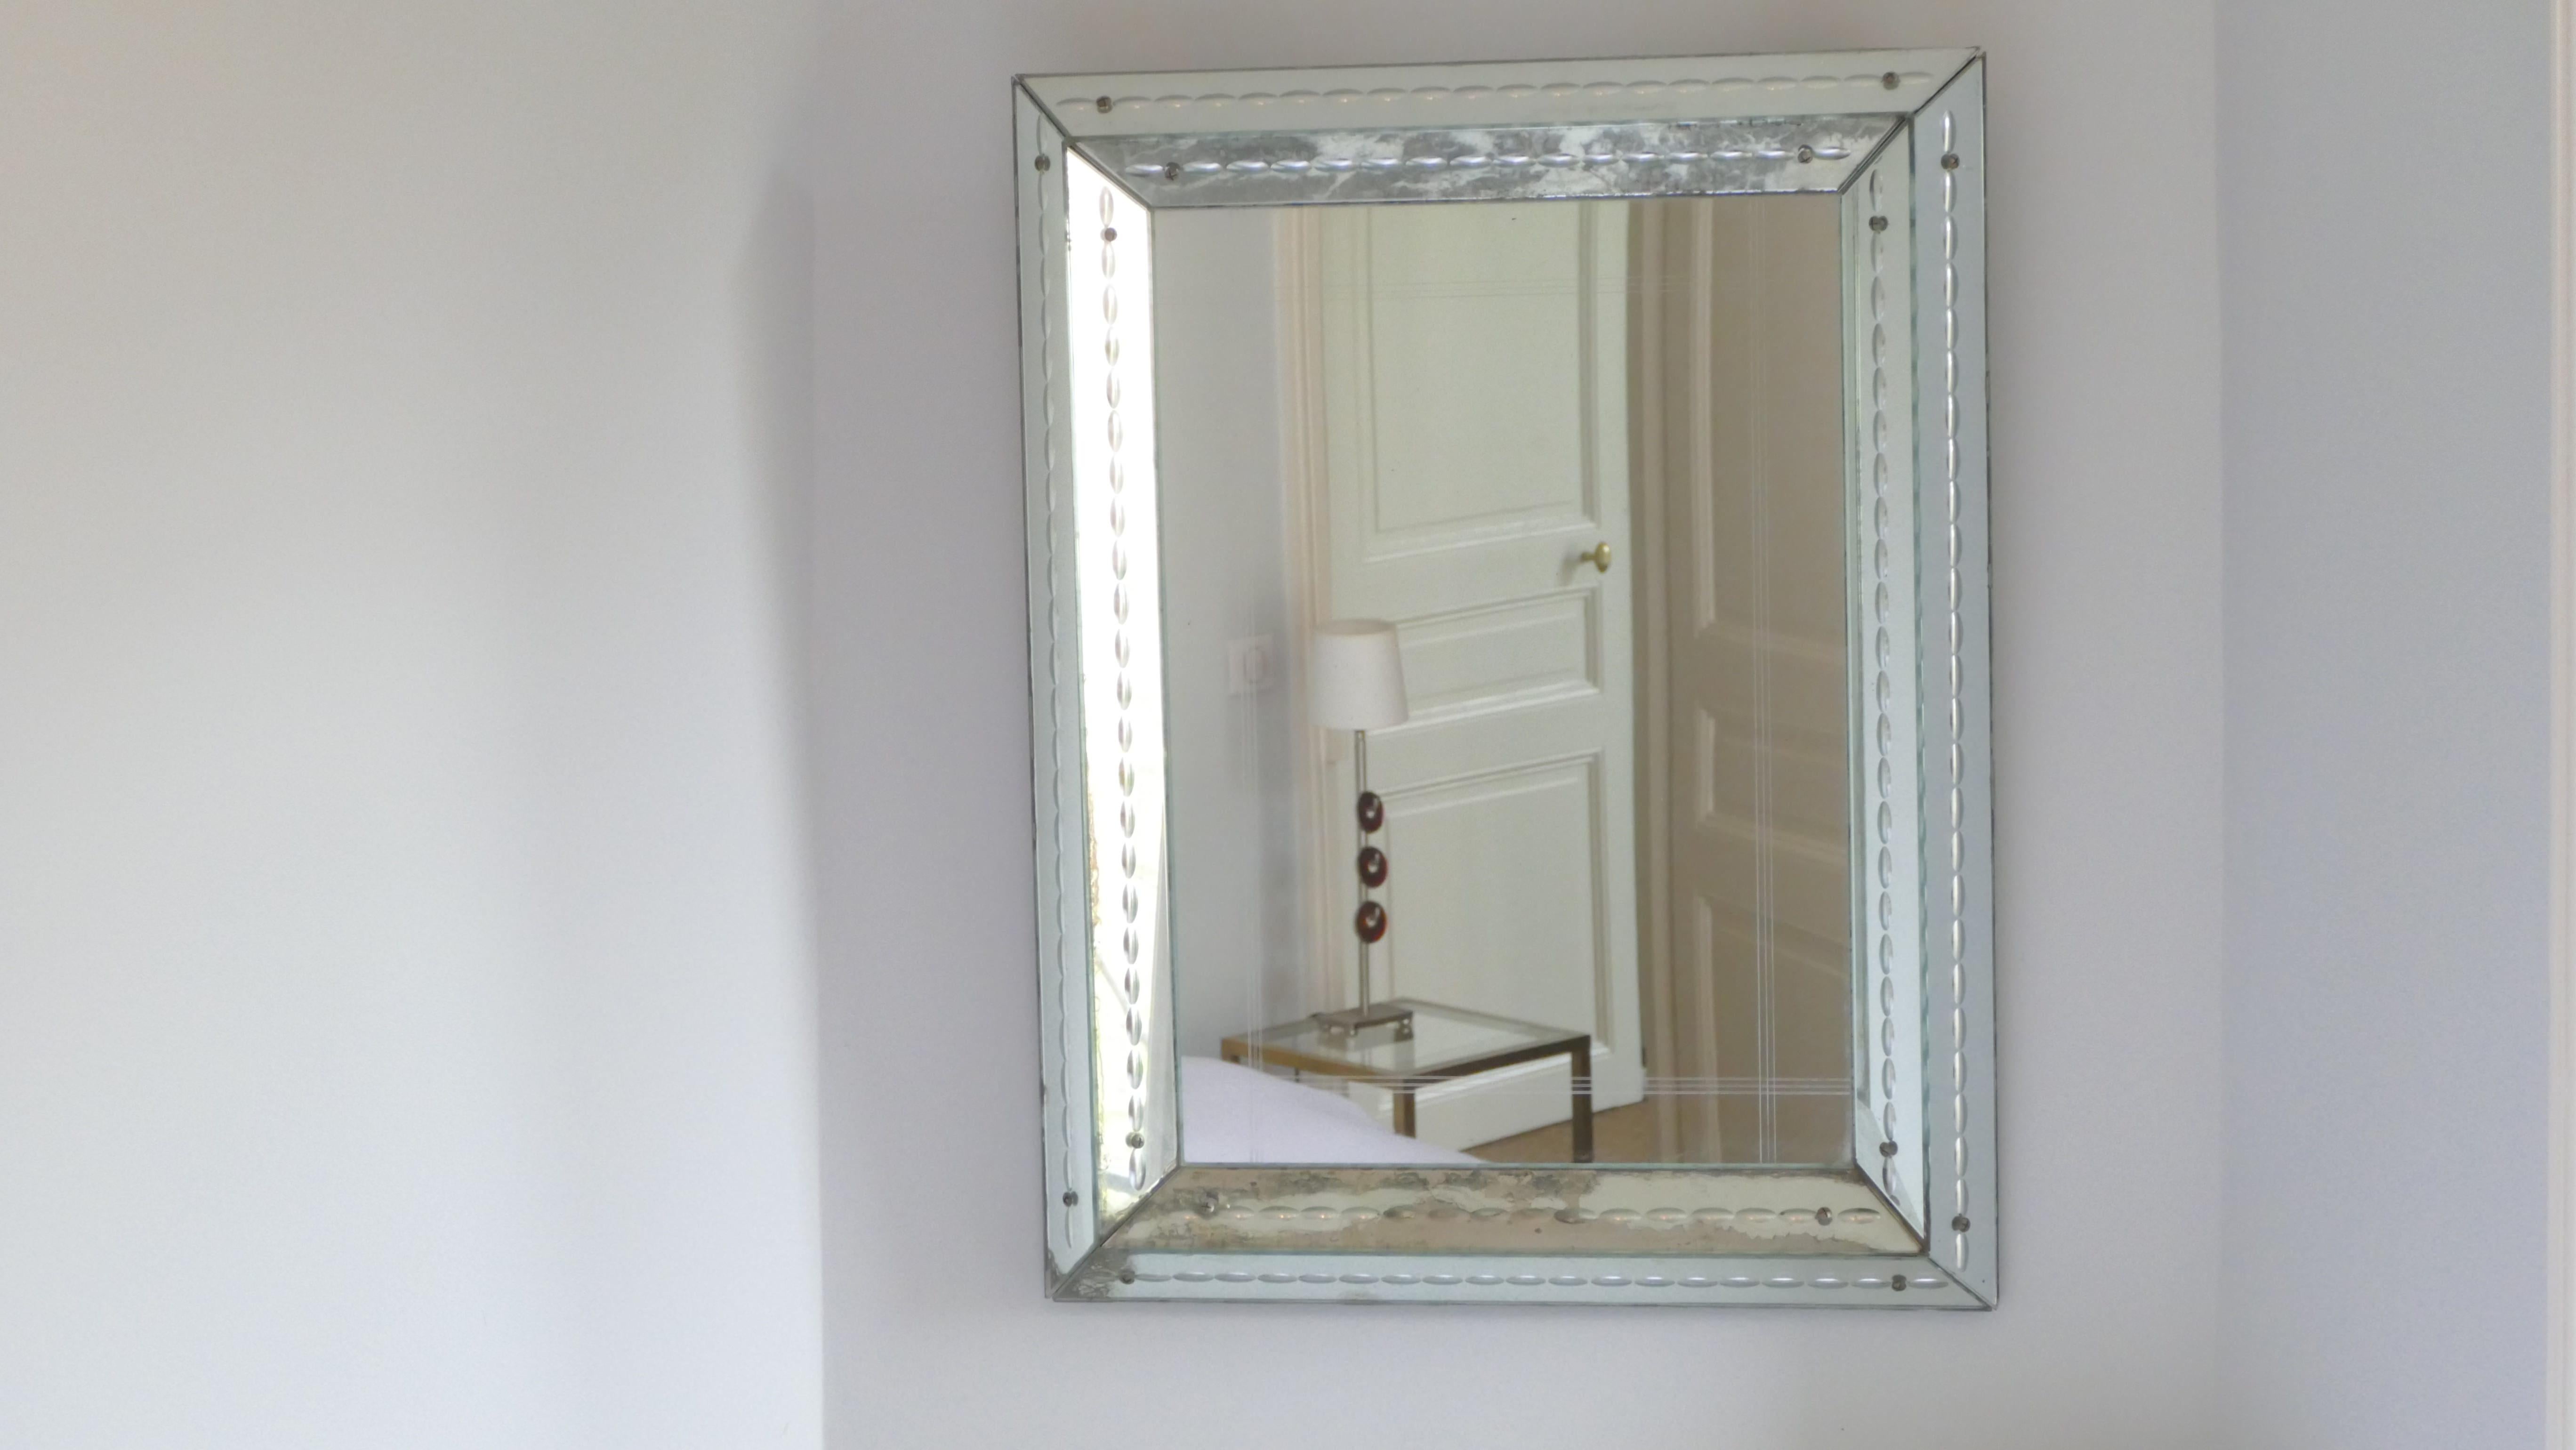 This weighty mirror attributed to Jacques adnet, from the 1940s, has aged gracefully; its charming patina now imbues it with a lovely romantic feel. Displaying elements of the late art deco period and early modernism, the mirror is typical Jacques